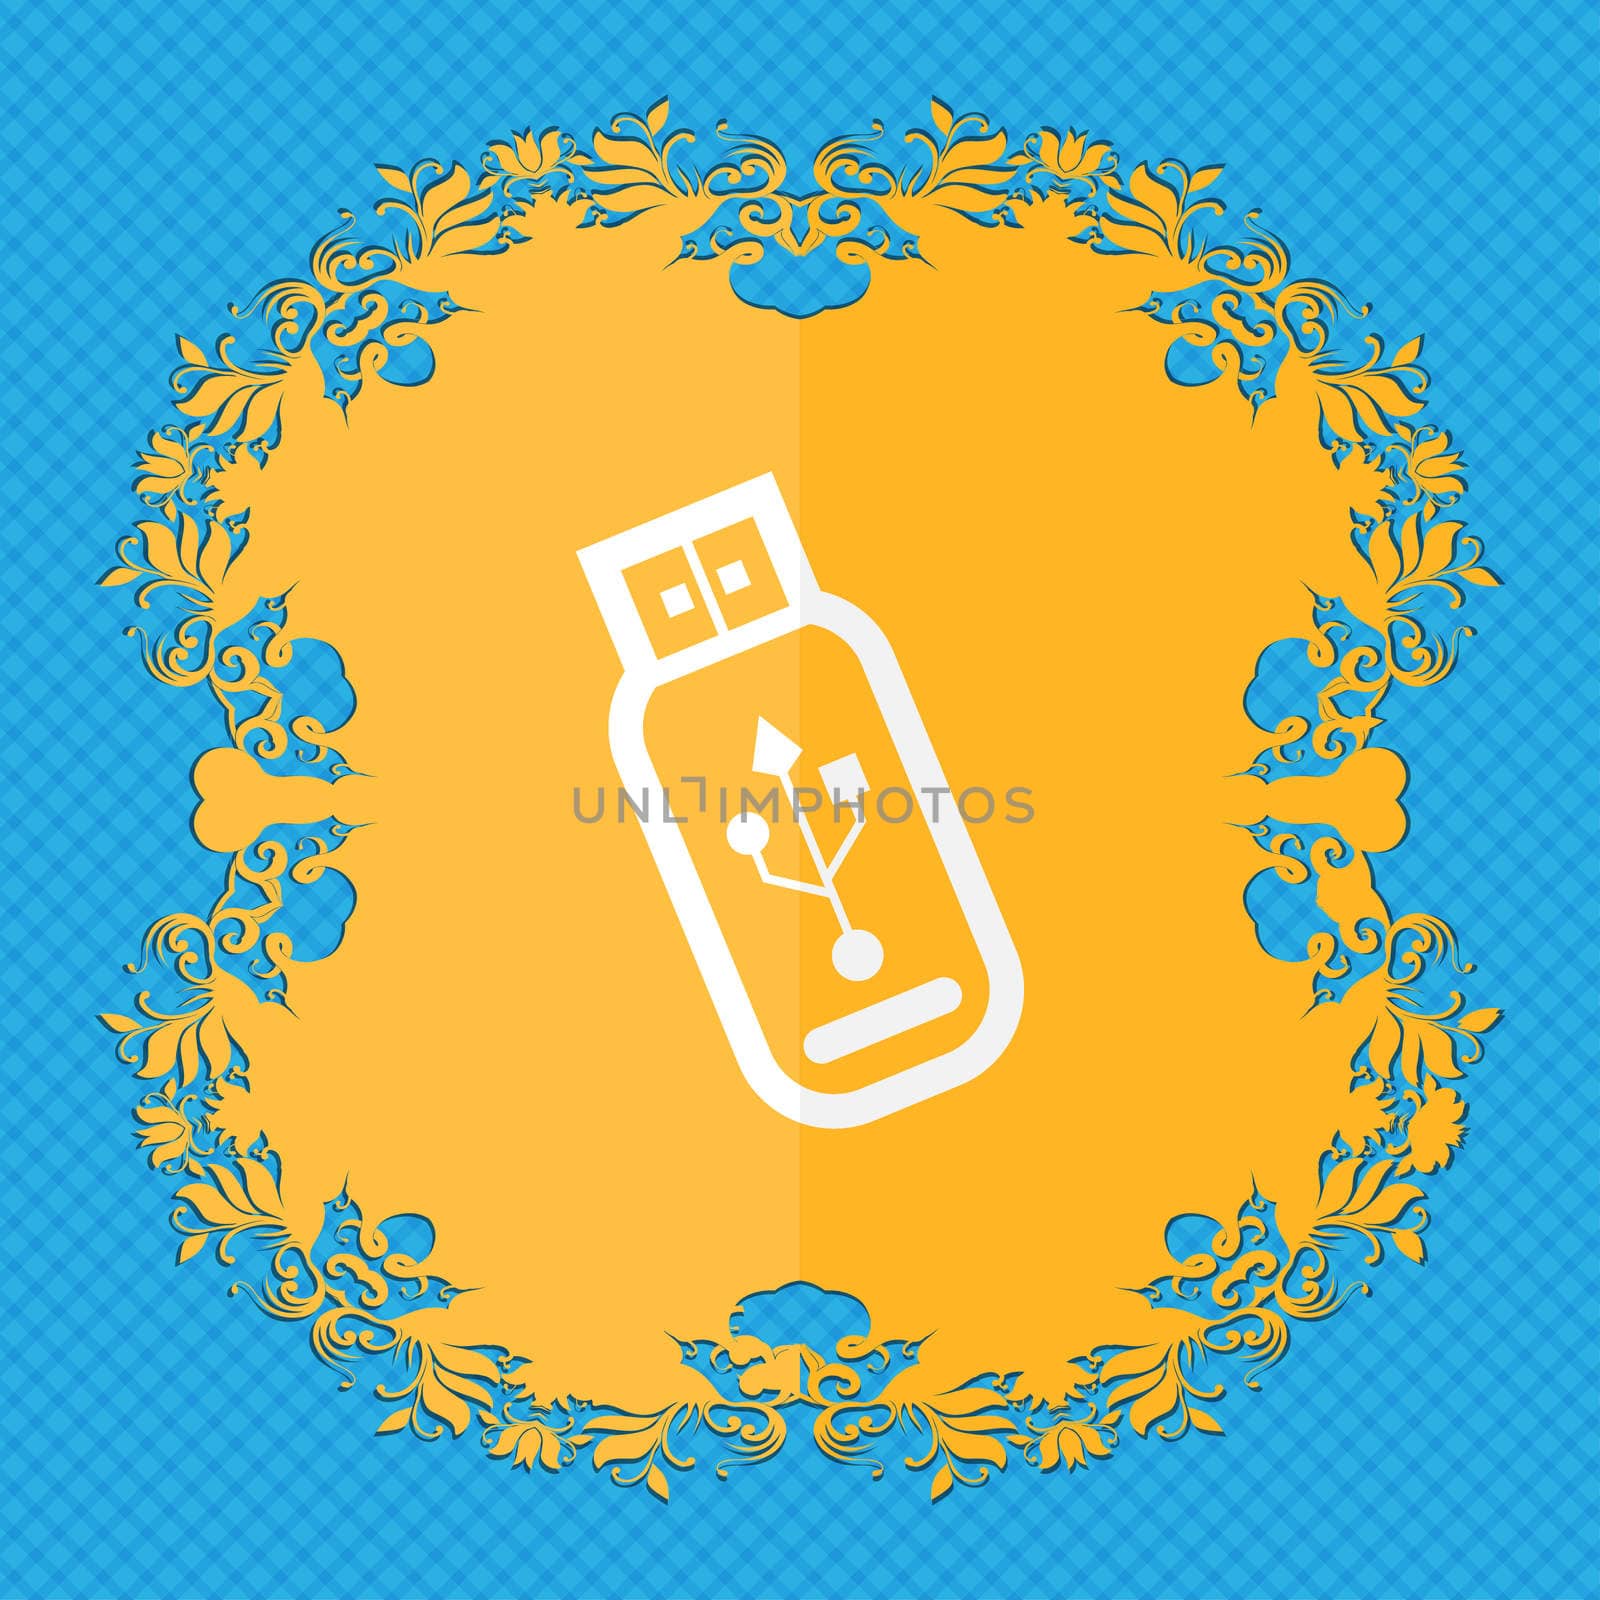 Usb flash drive. Floral flat design on a blue abstract background with place for your text. illustration